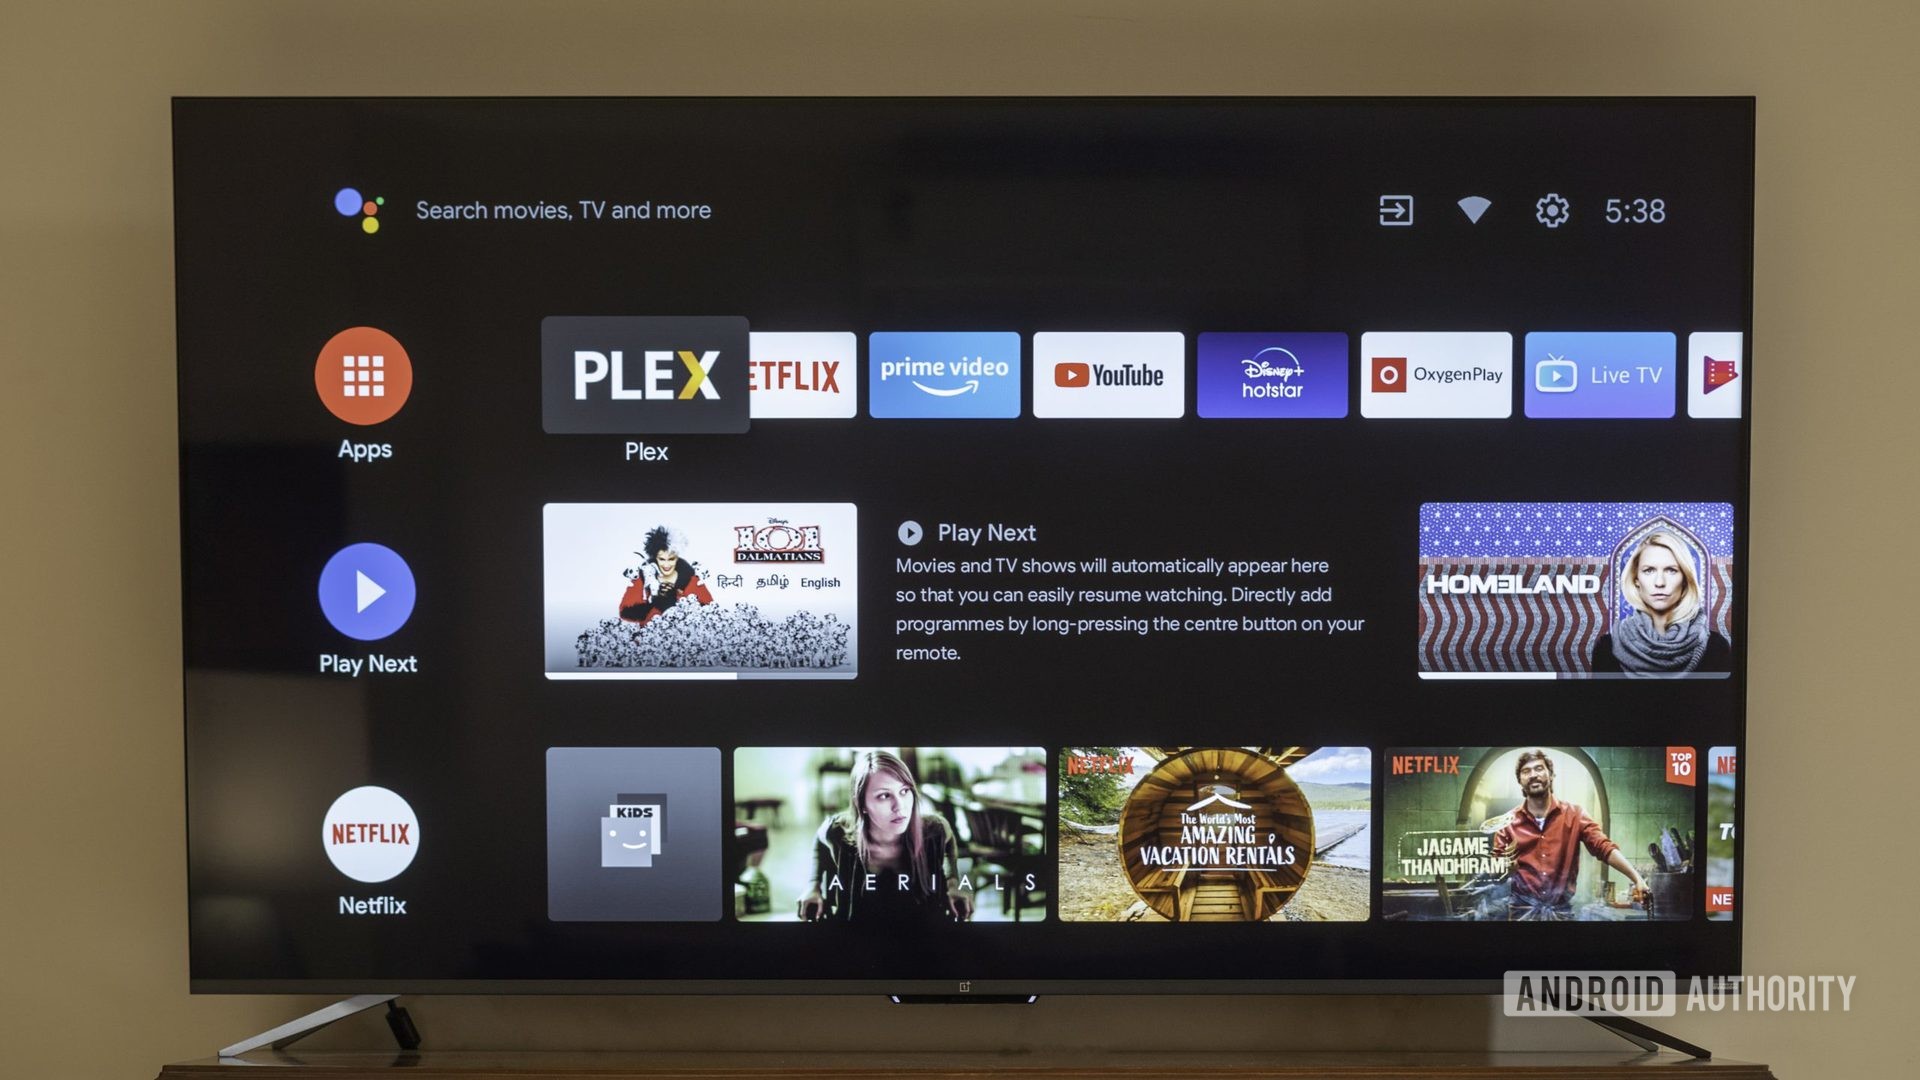 oneplus tv with android tv interface